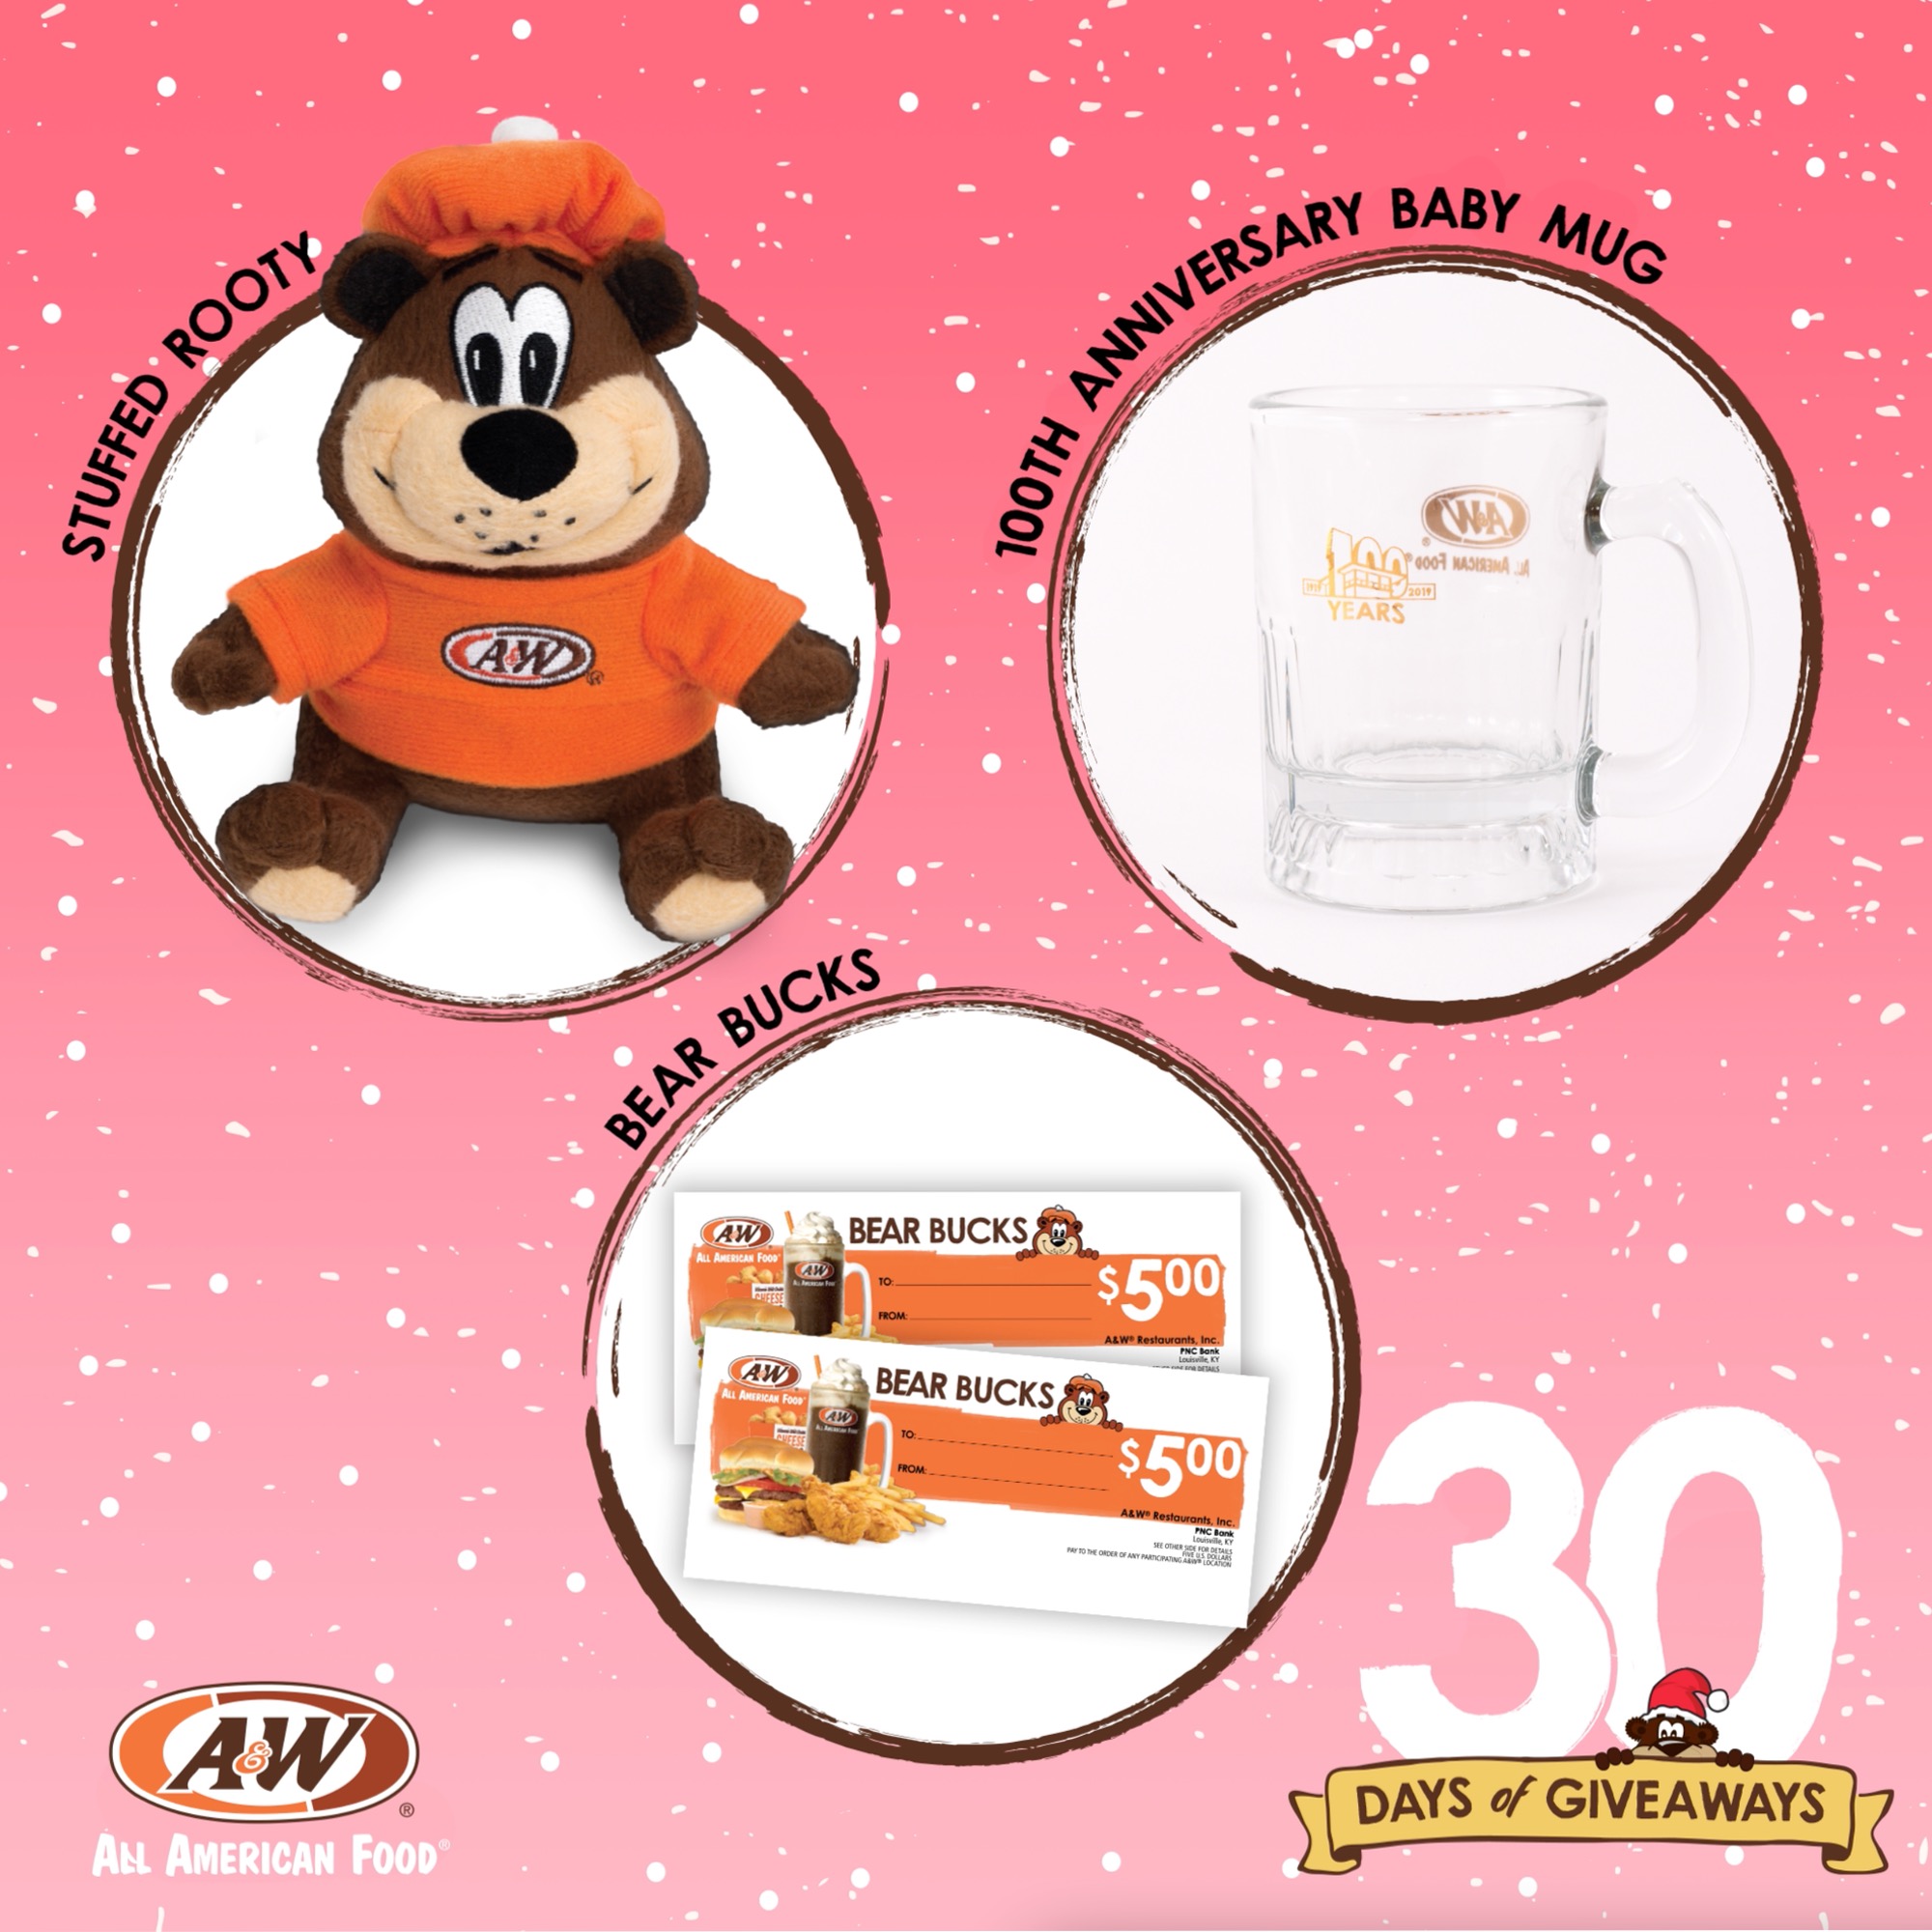 30 Days of Giveaways Prize Pack One featuring Stuffed Rooty, 100th Anniversary Baby Mug, and Bear Bucks.